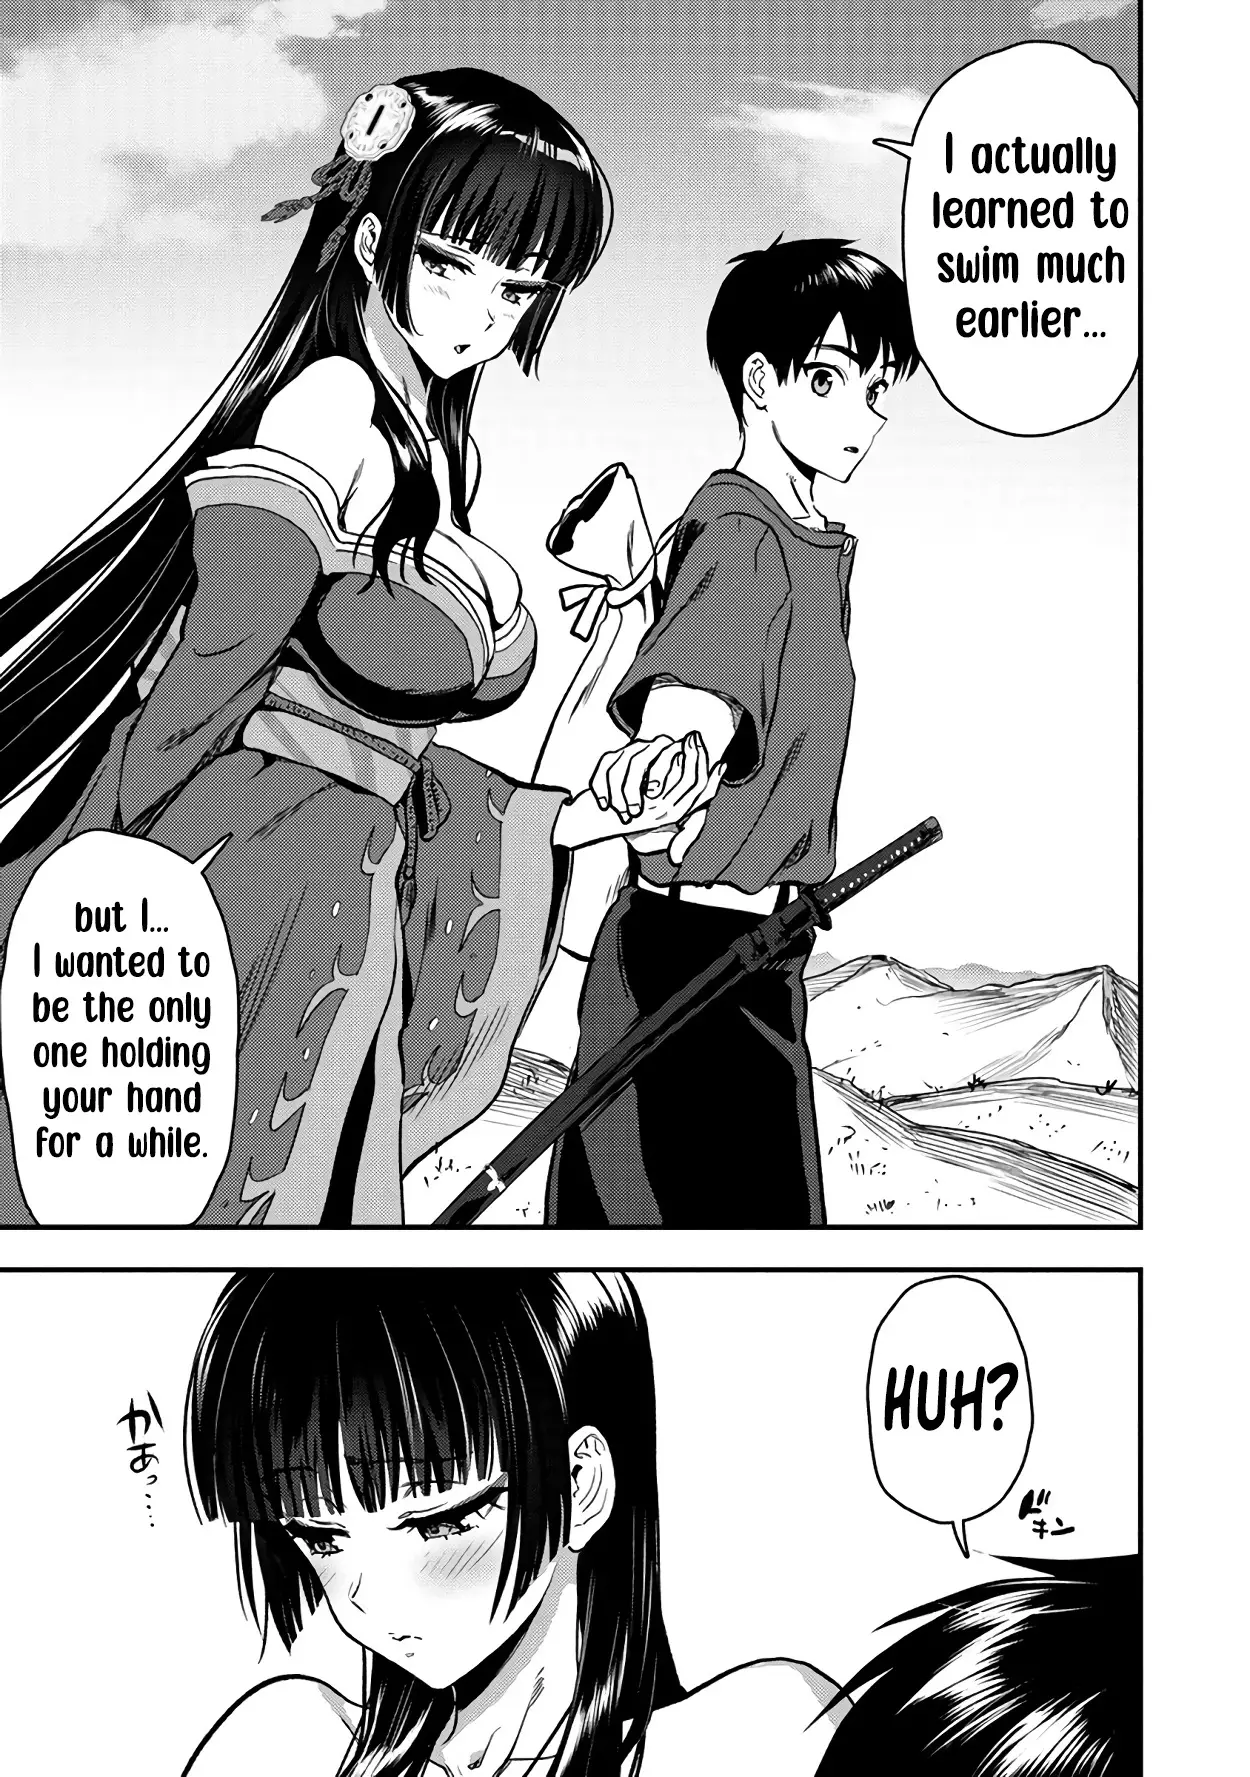 The Cursed Sword Master’S Harem Life: By The Sword, For The Sword, Cursed Sword Master - 27 page 27-b67844fd